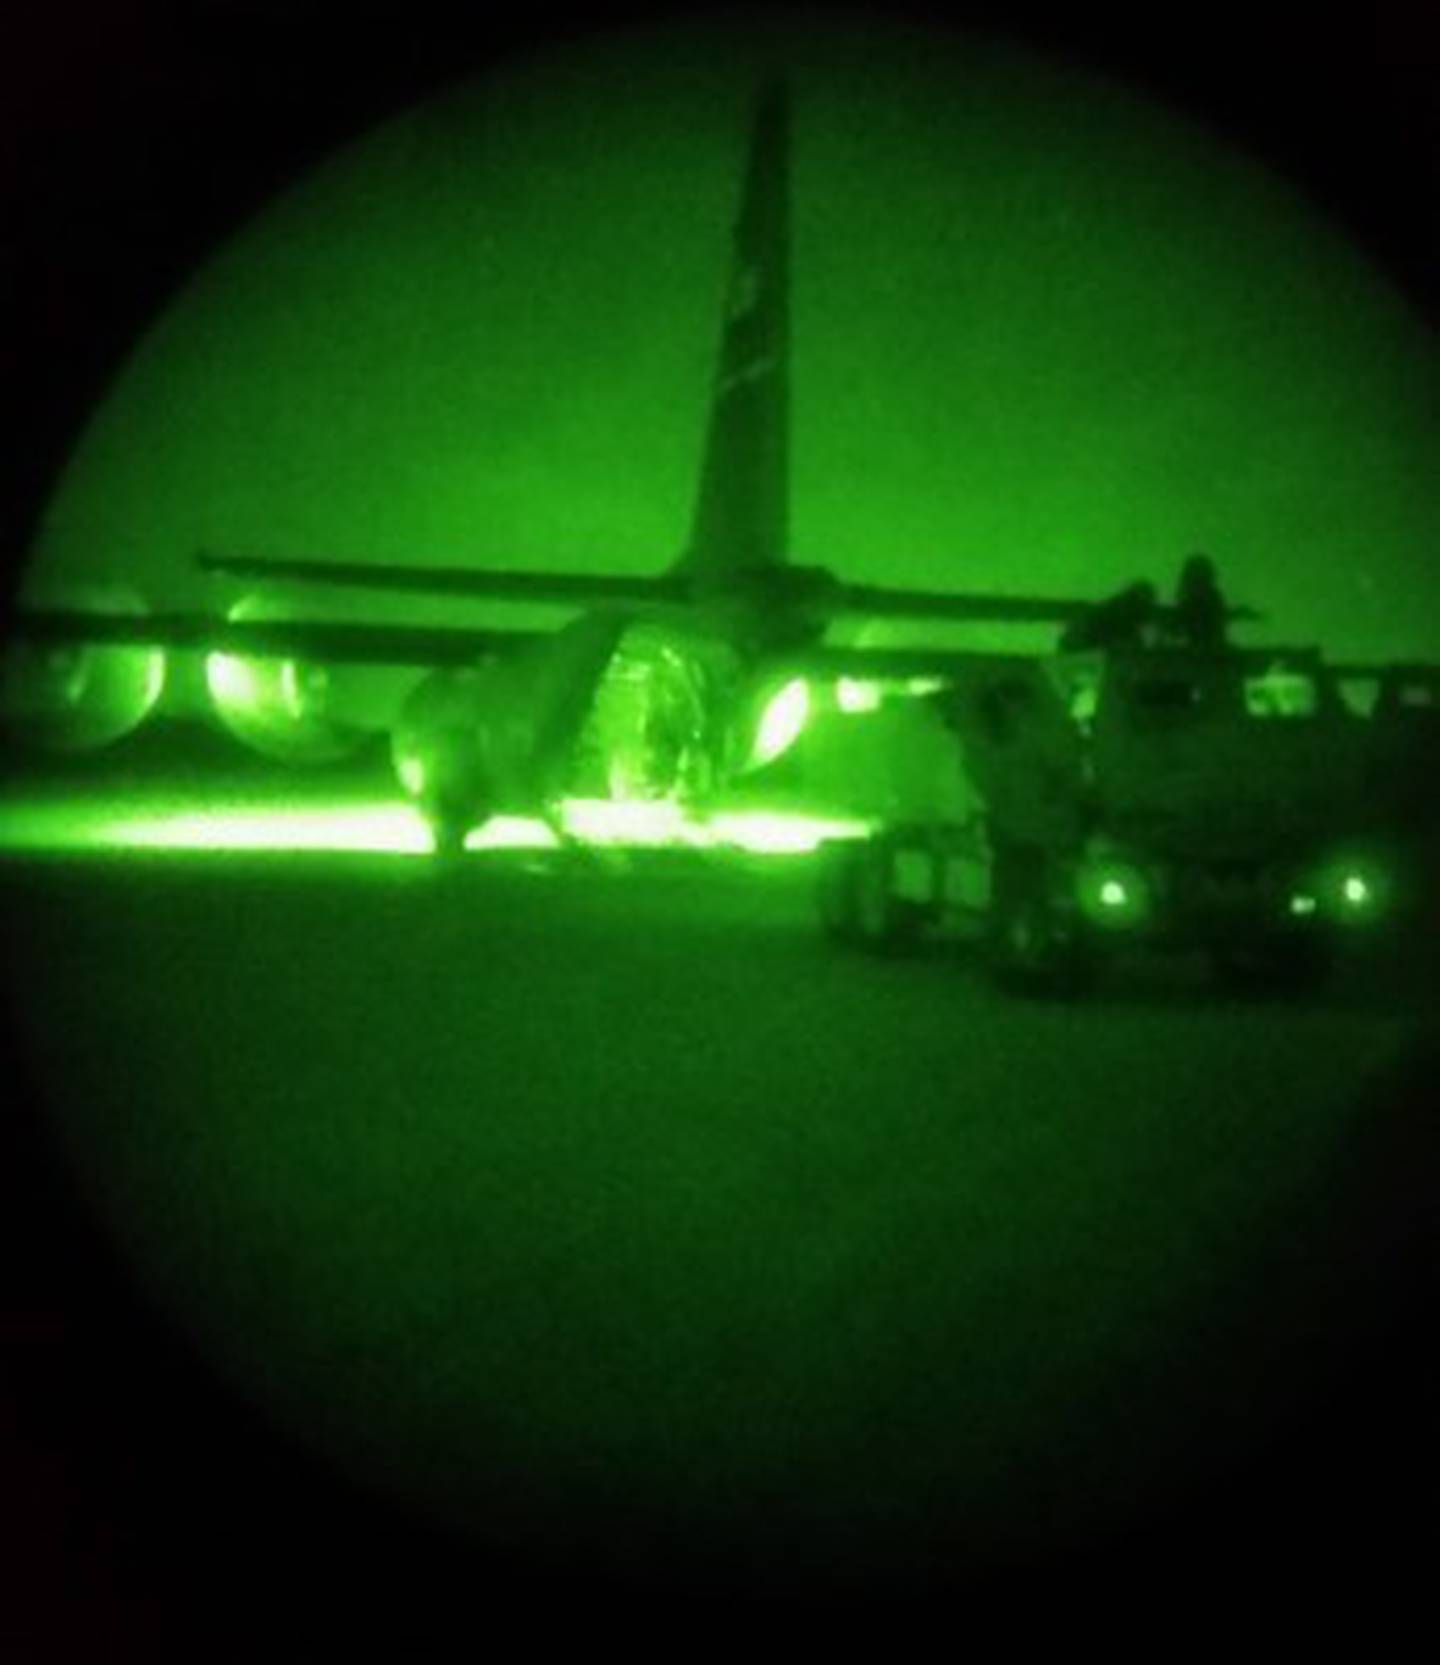 Alpha Battery, 5th Battalion, 3rd Field Artillery Regiment, 17th Field Artillery Brigade, participates in Operation Jade Helm to demonstrate the effectiveness of integrated operations with conventional forces in 2016 at Dyess Air Force Base, Texas, and Camp Bullis, Texas.